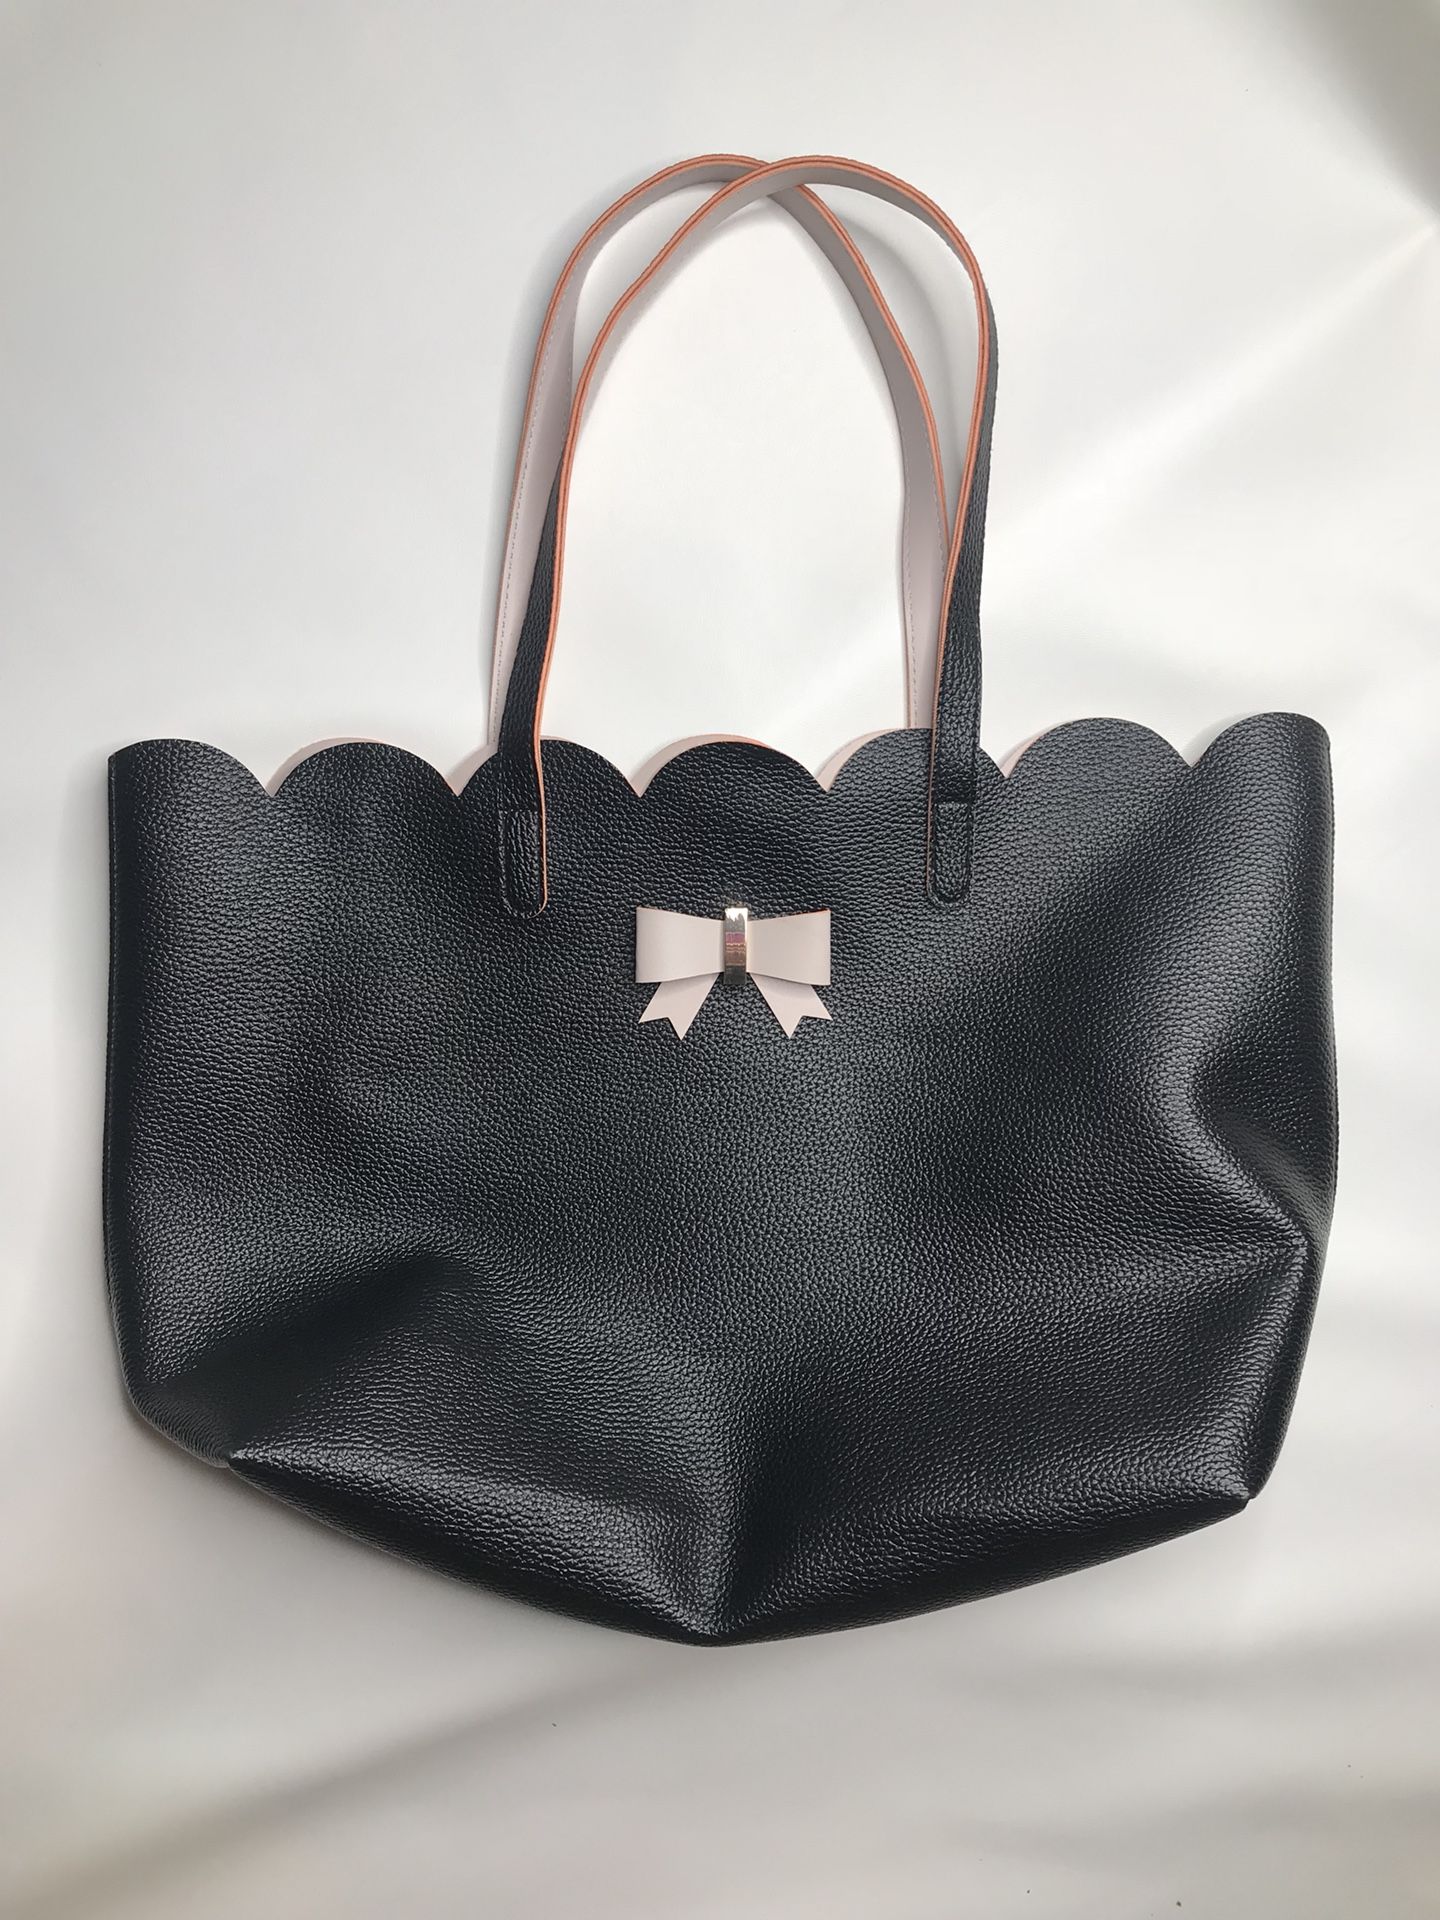 Black large tote bag with pink bow purse scallop edges